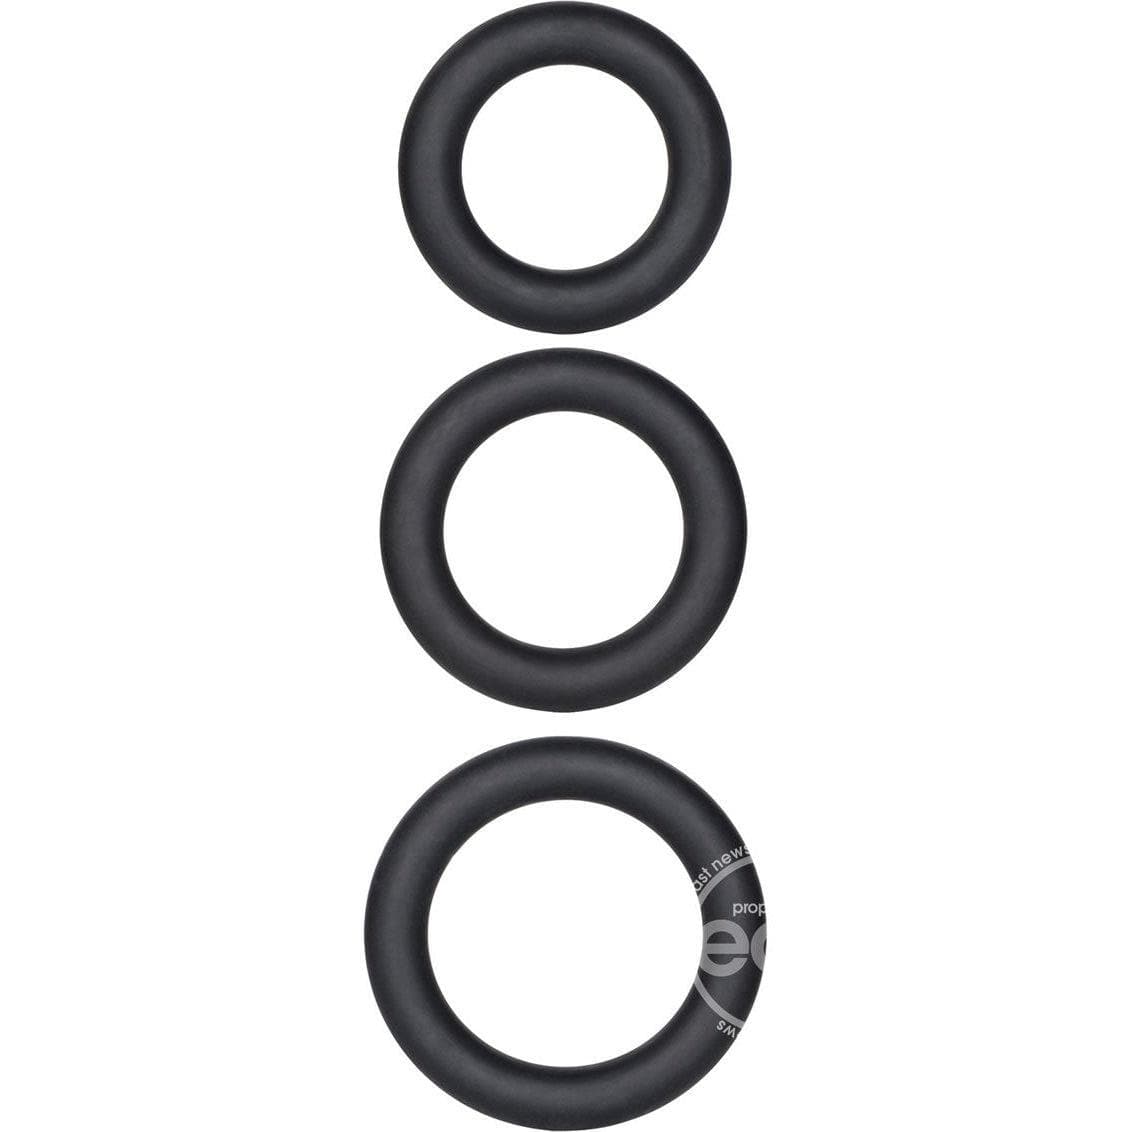 Dr. Joel Kaplan Silicone Support 3 Piece Penis Ring Set - Romantic Blessings